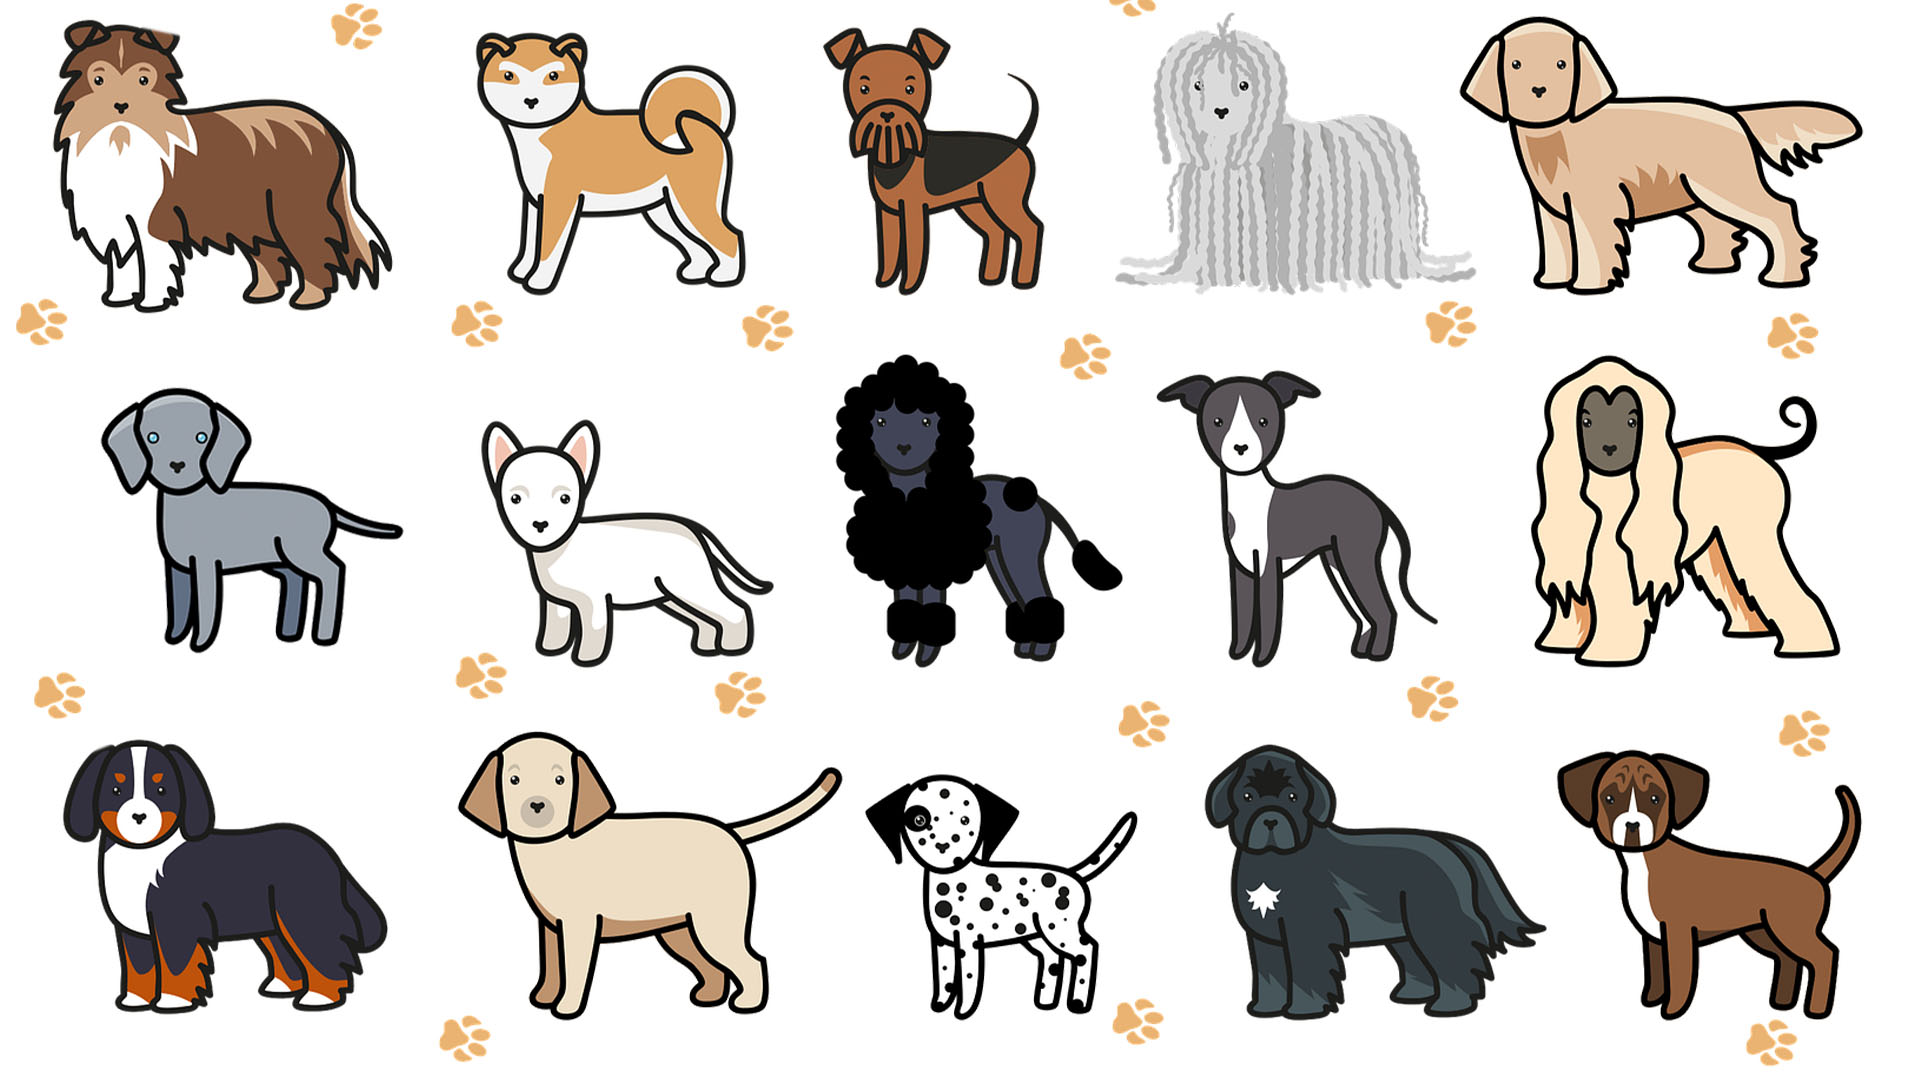 12 different types of illustrated dogs with yellow paw prints spreading across the image